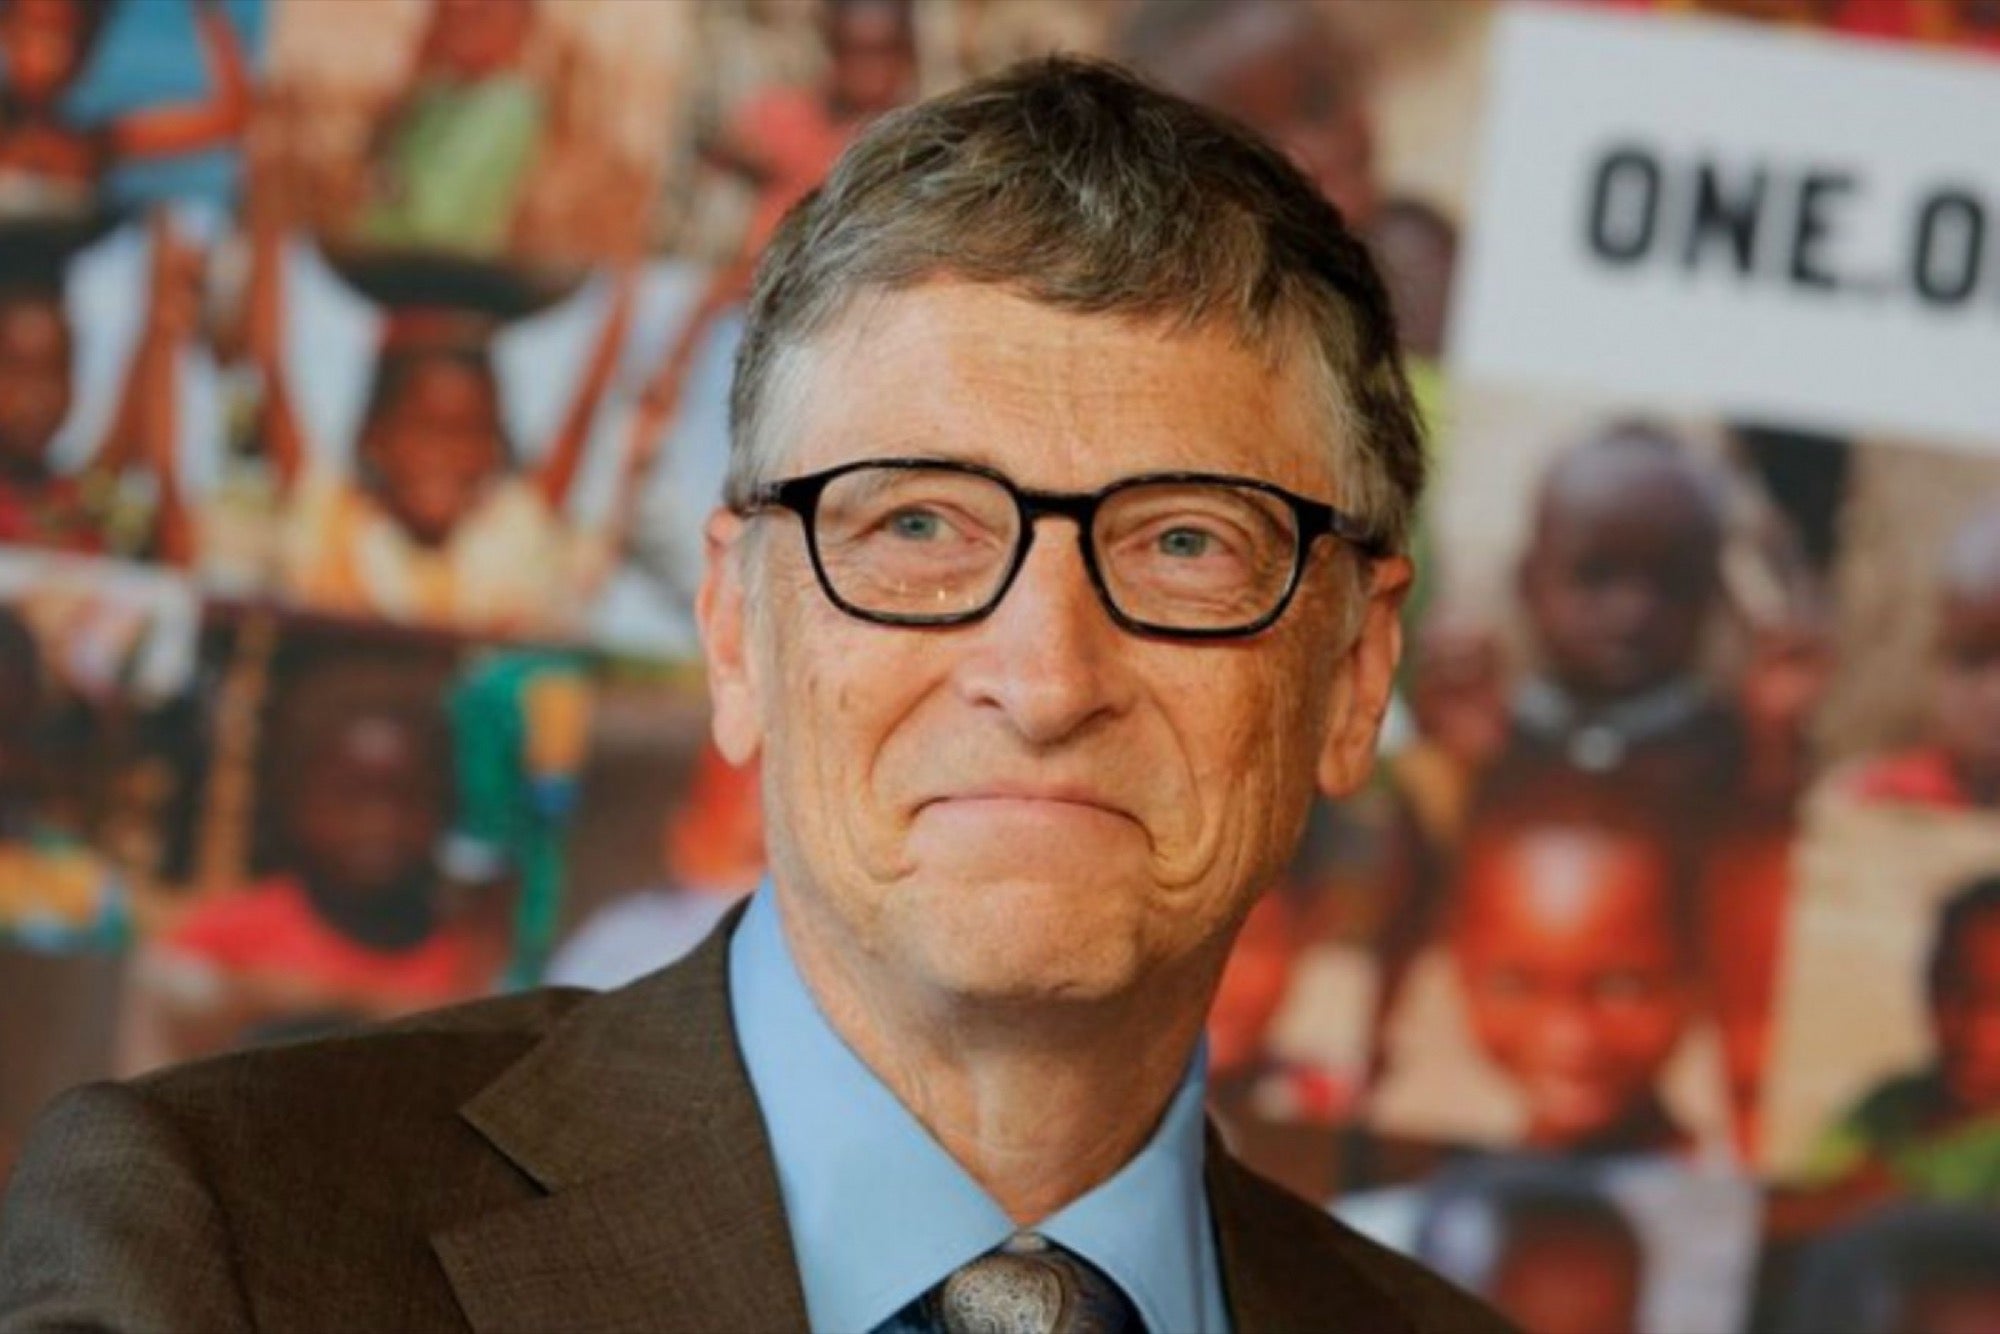 There's No Vacation and No Rest After Starting a Business, Says Bill Gates